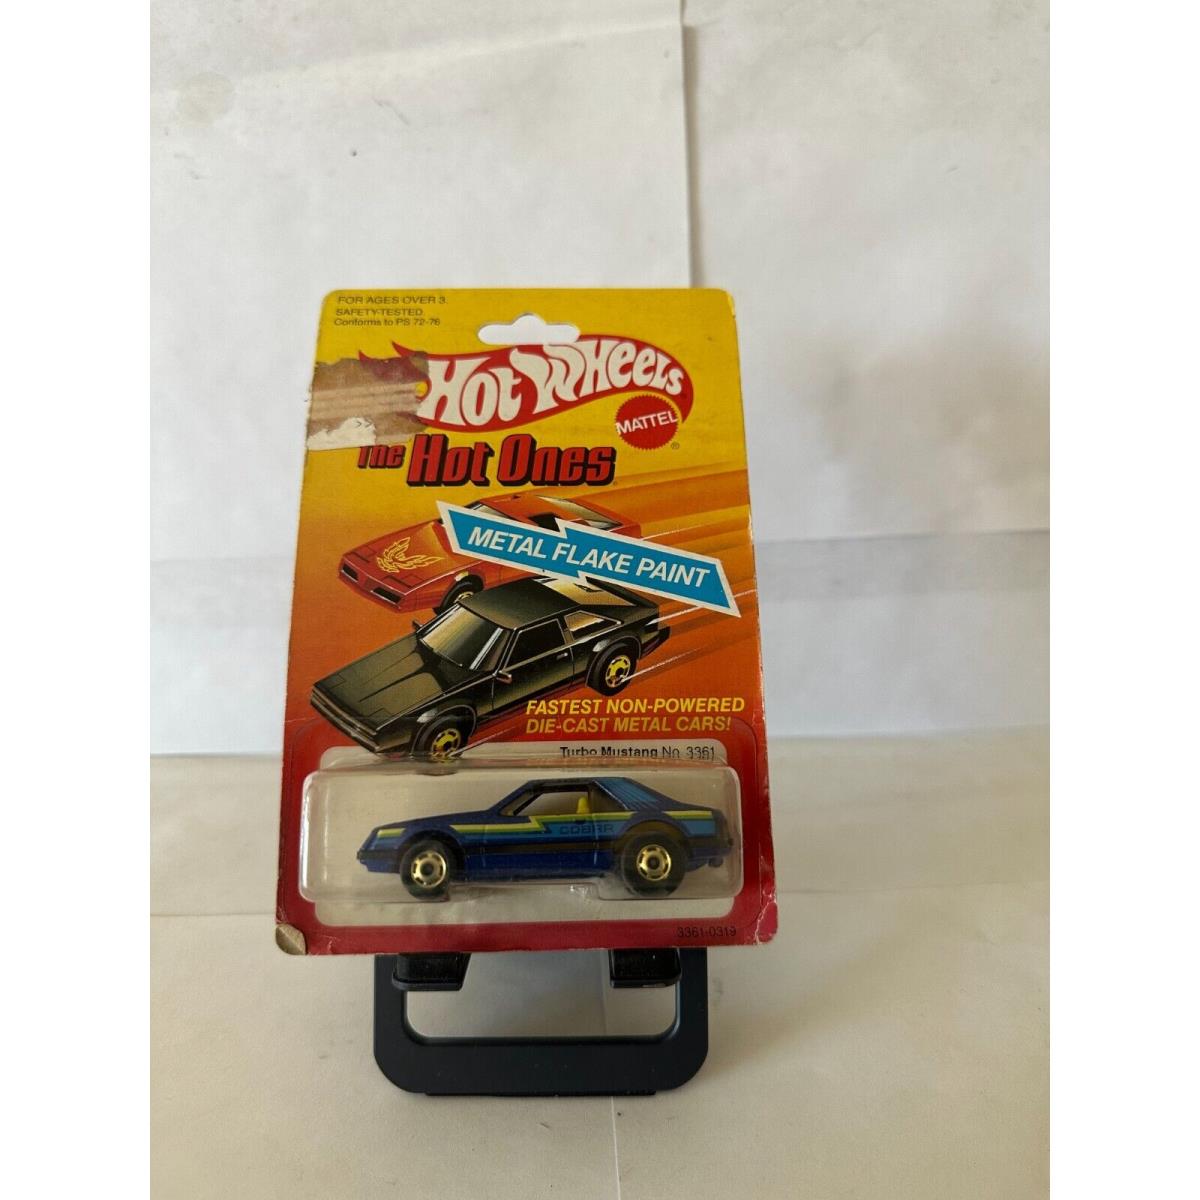 Hot Wheels The Hot Ones Turbo Mustang No. 3361 Metal Flake Paint P62